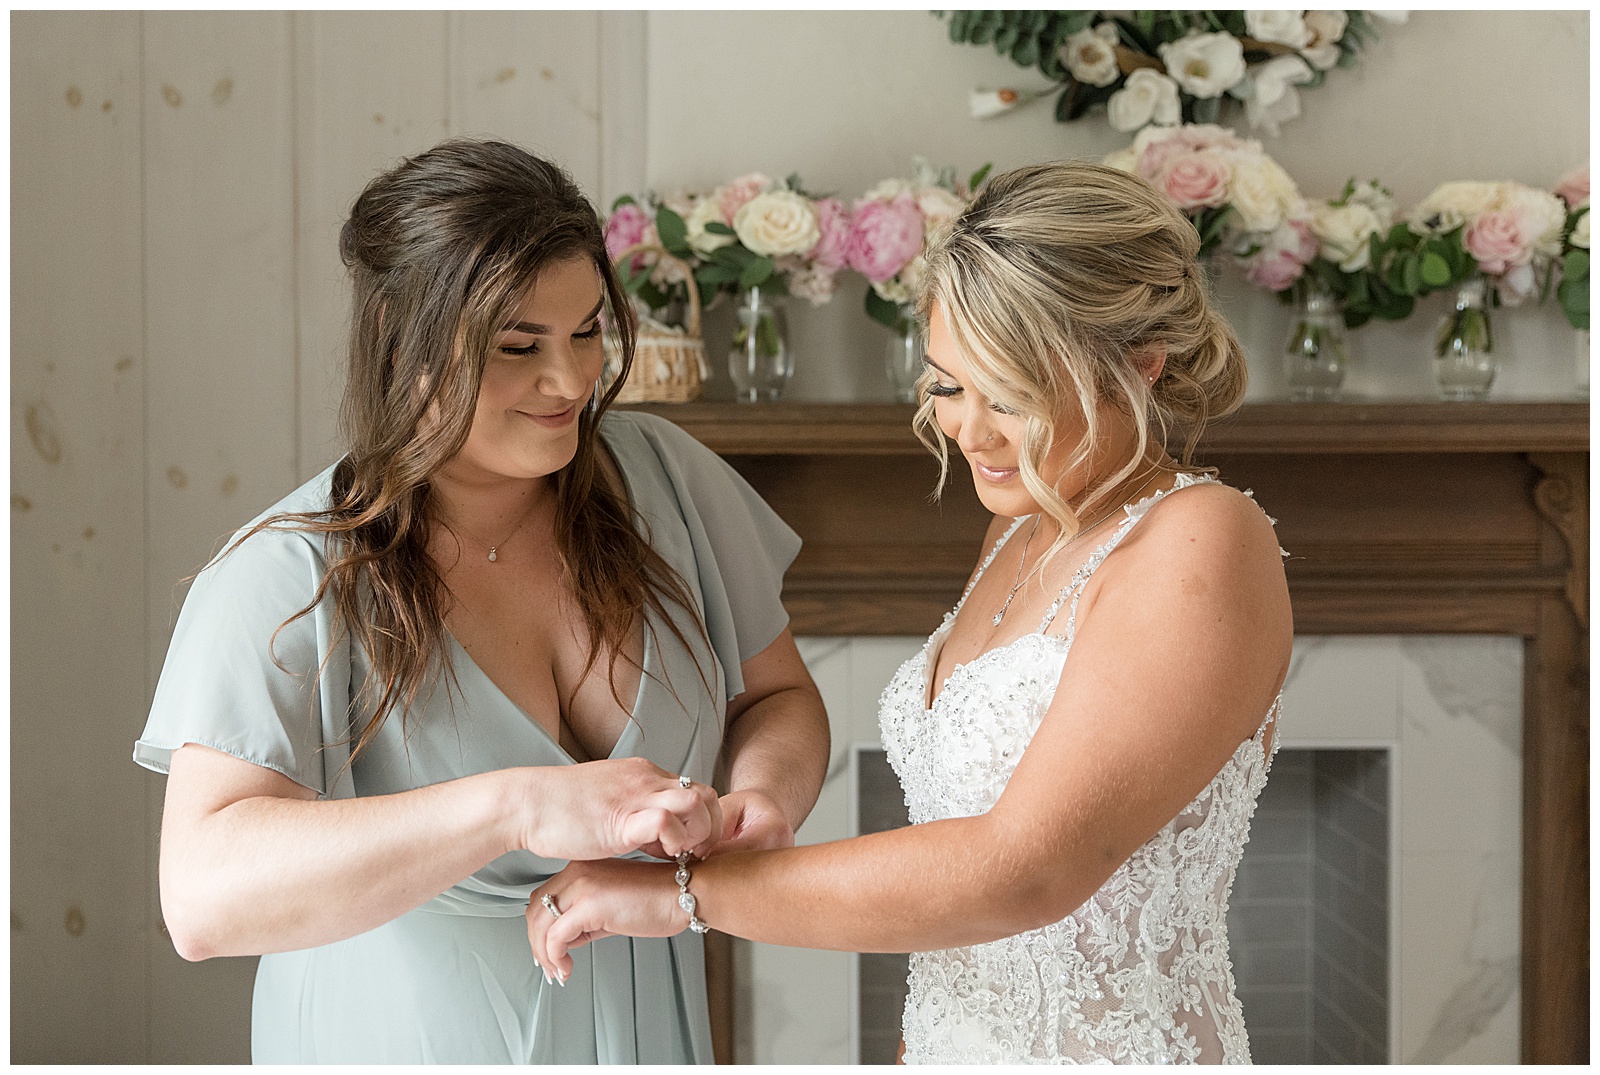 maid of honor helping bride with the clasp of her bracelet in bridal suite at barn venue in lancaster county pennsylvania